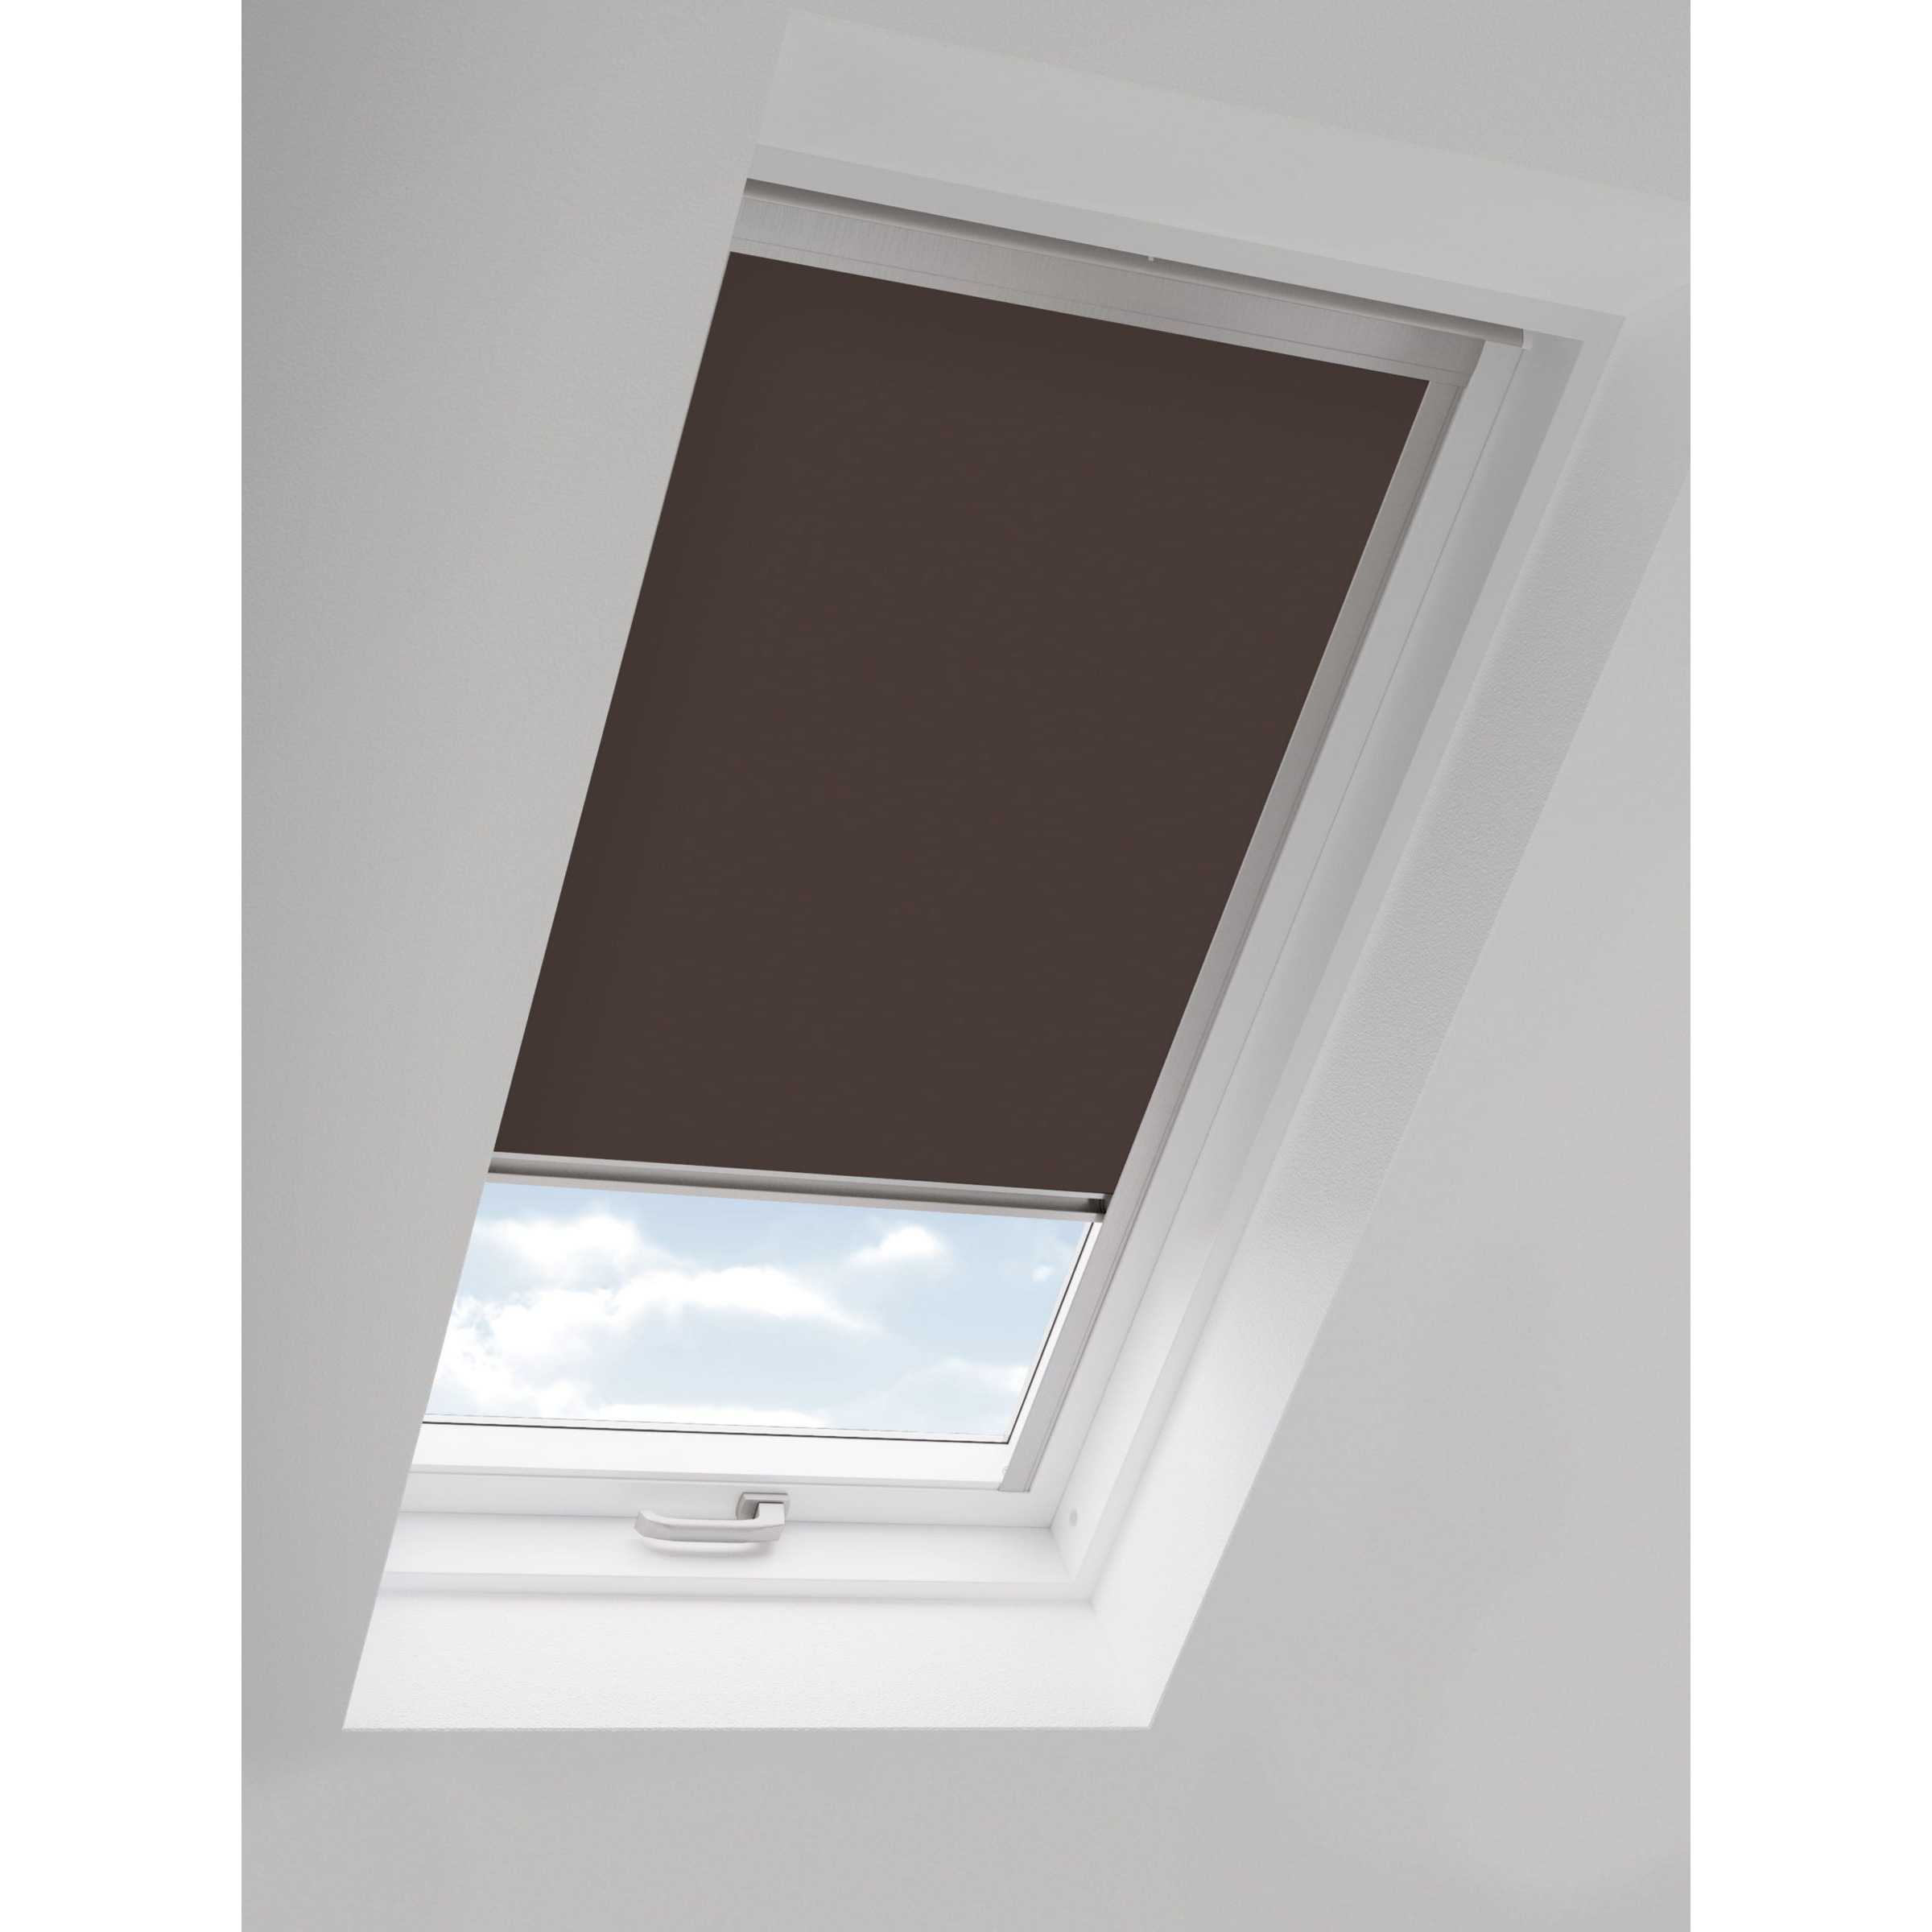 John Lewis Blackout Skylight Blind with Silver Frame, Brown - image 1